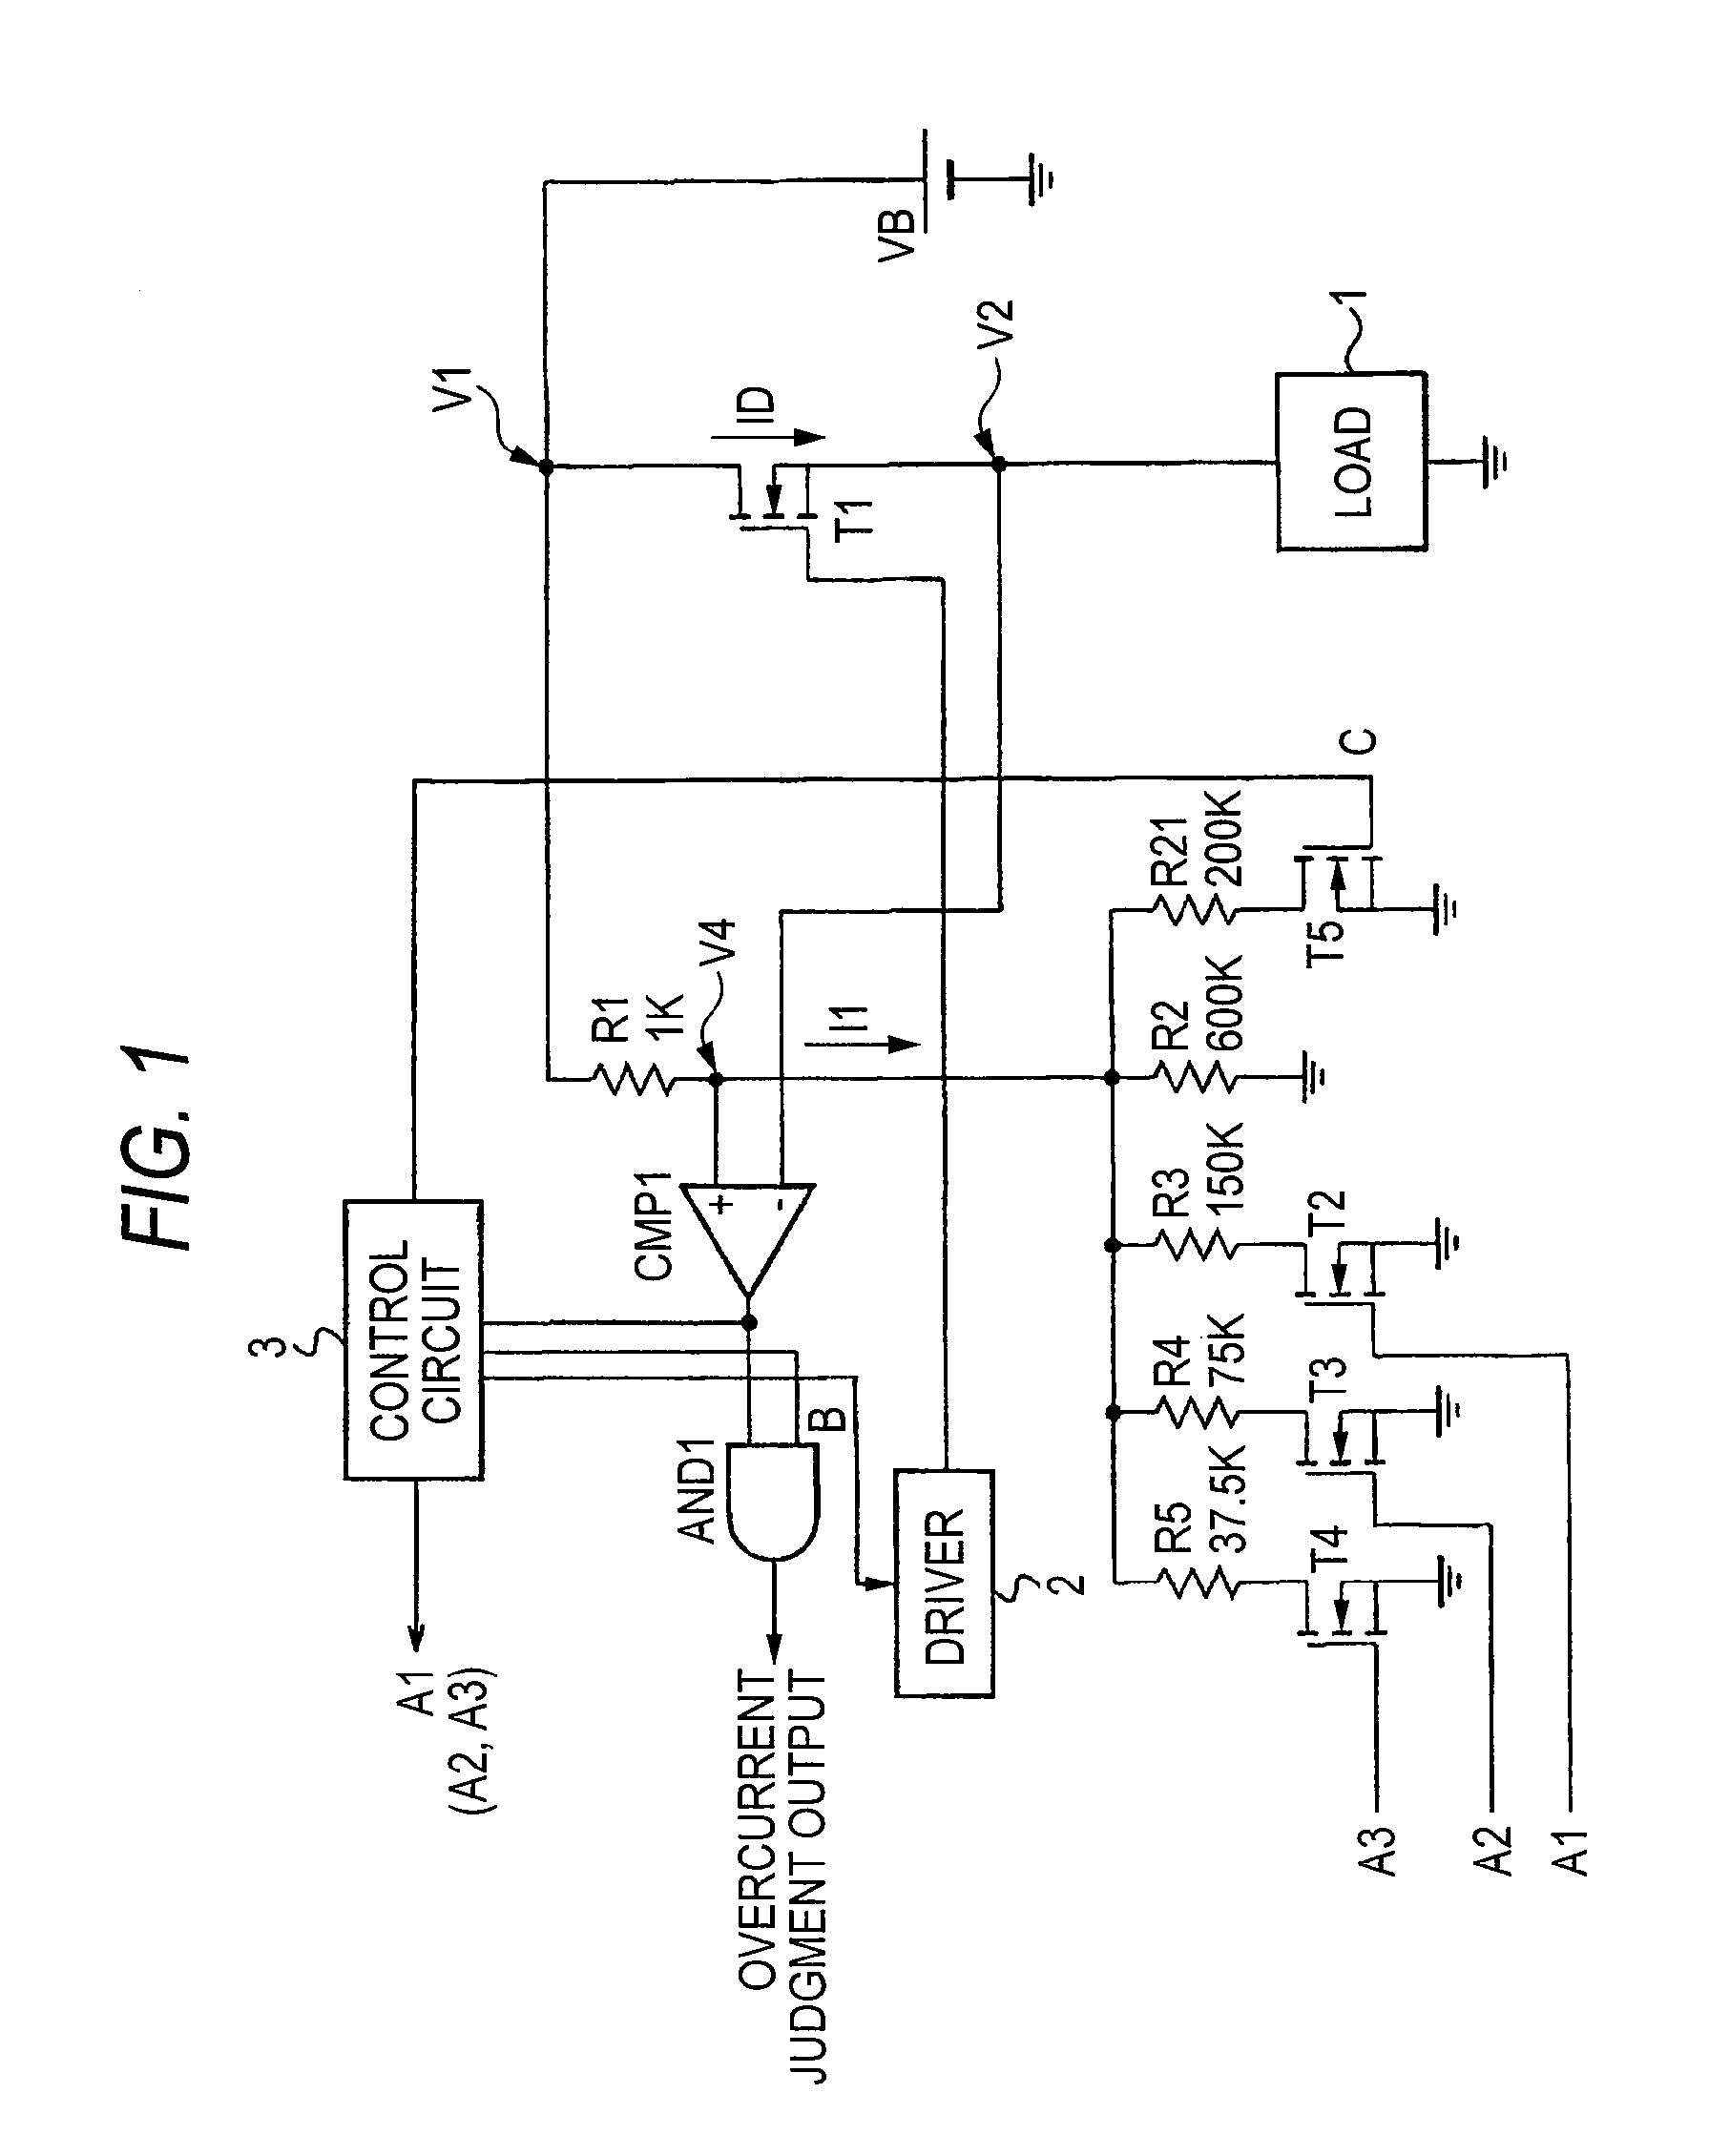 Load driving device with diagnosing unit for overcurrent detector